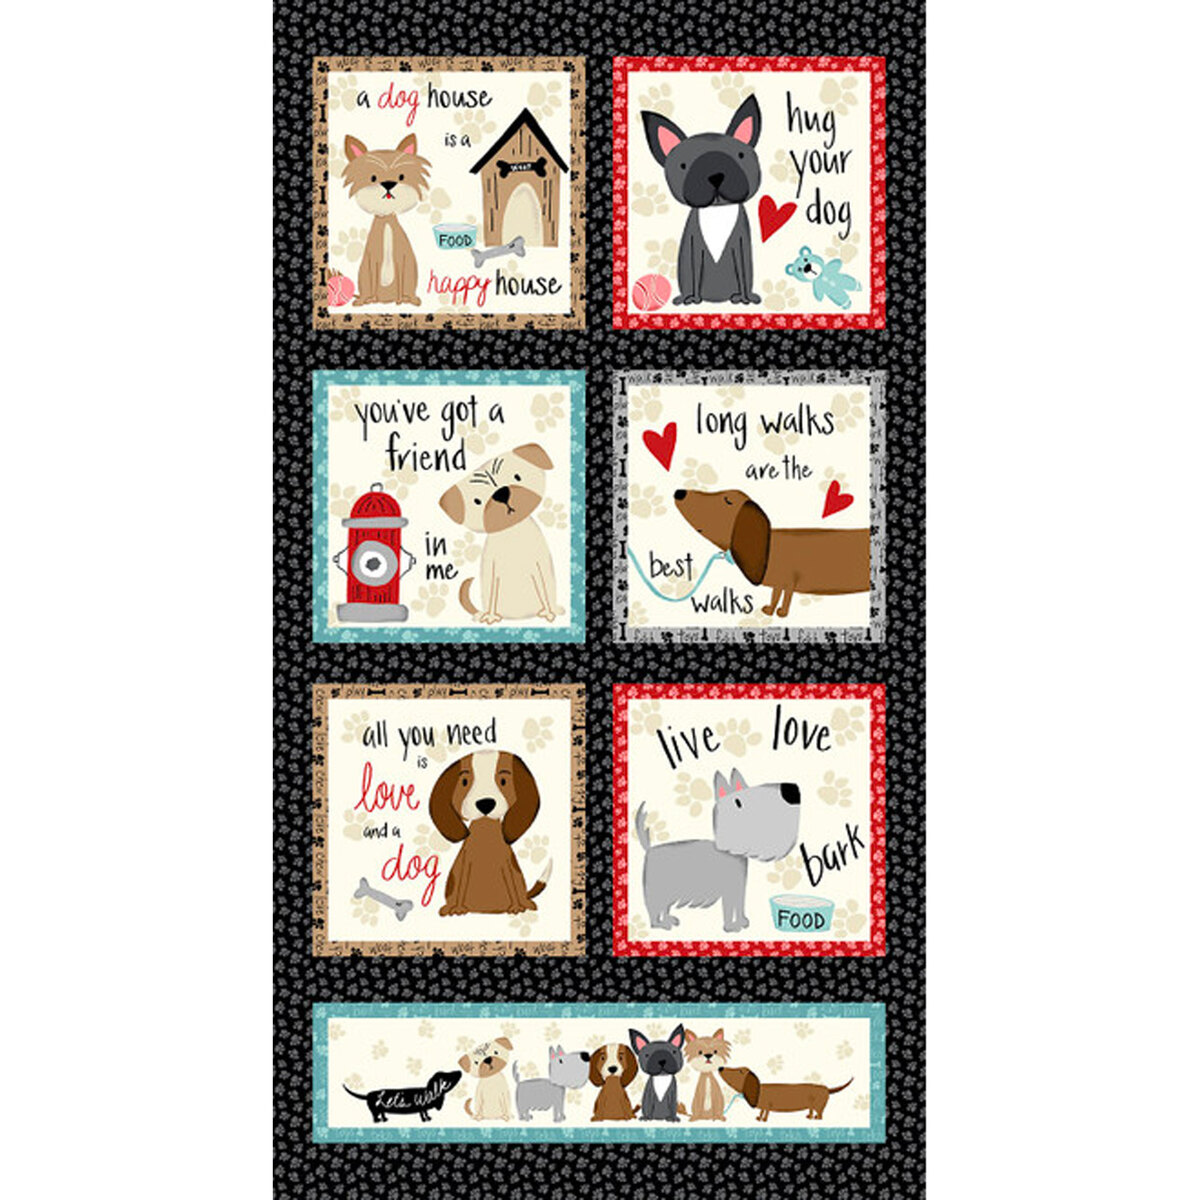 Retro Animal Valentine's Day Cards Graphic by Patterns for Dessert ·  Creative Fabrica